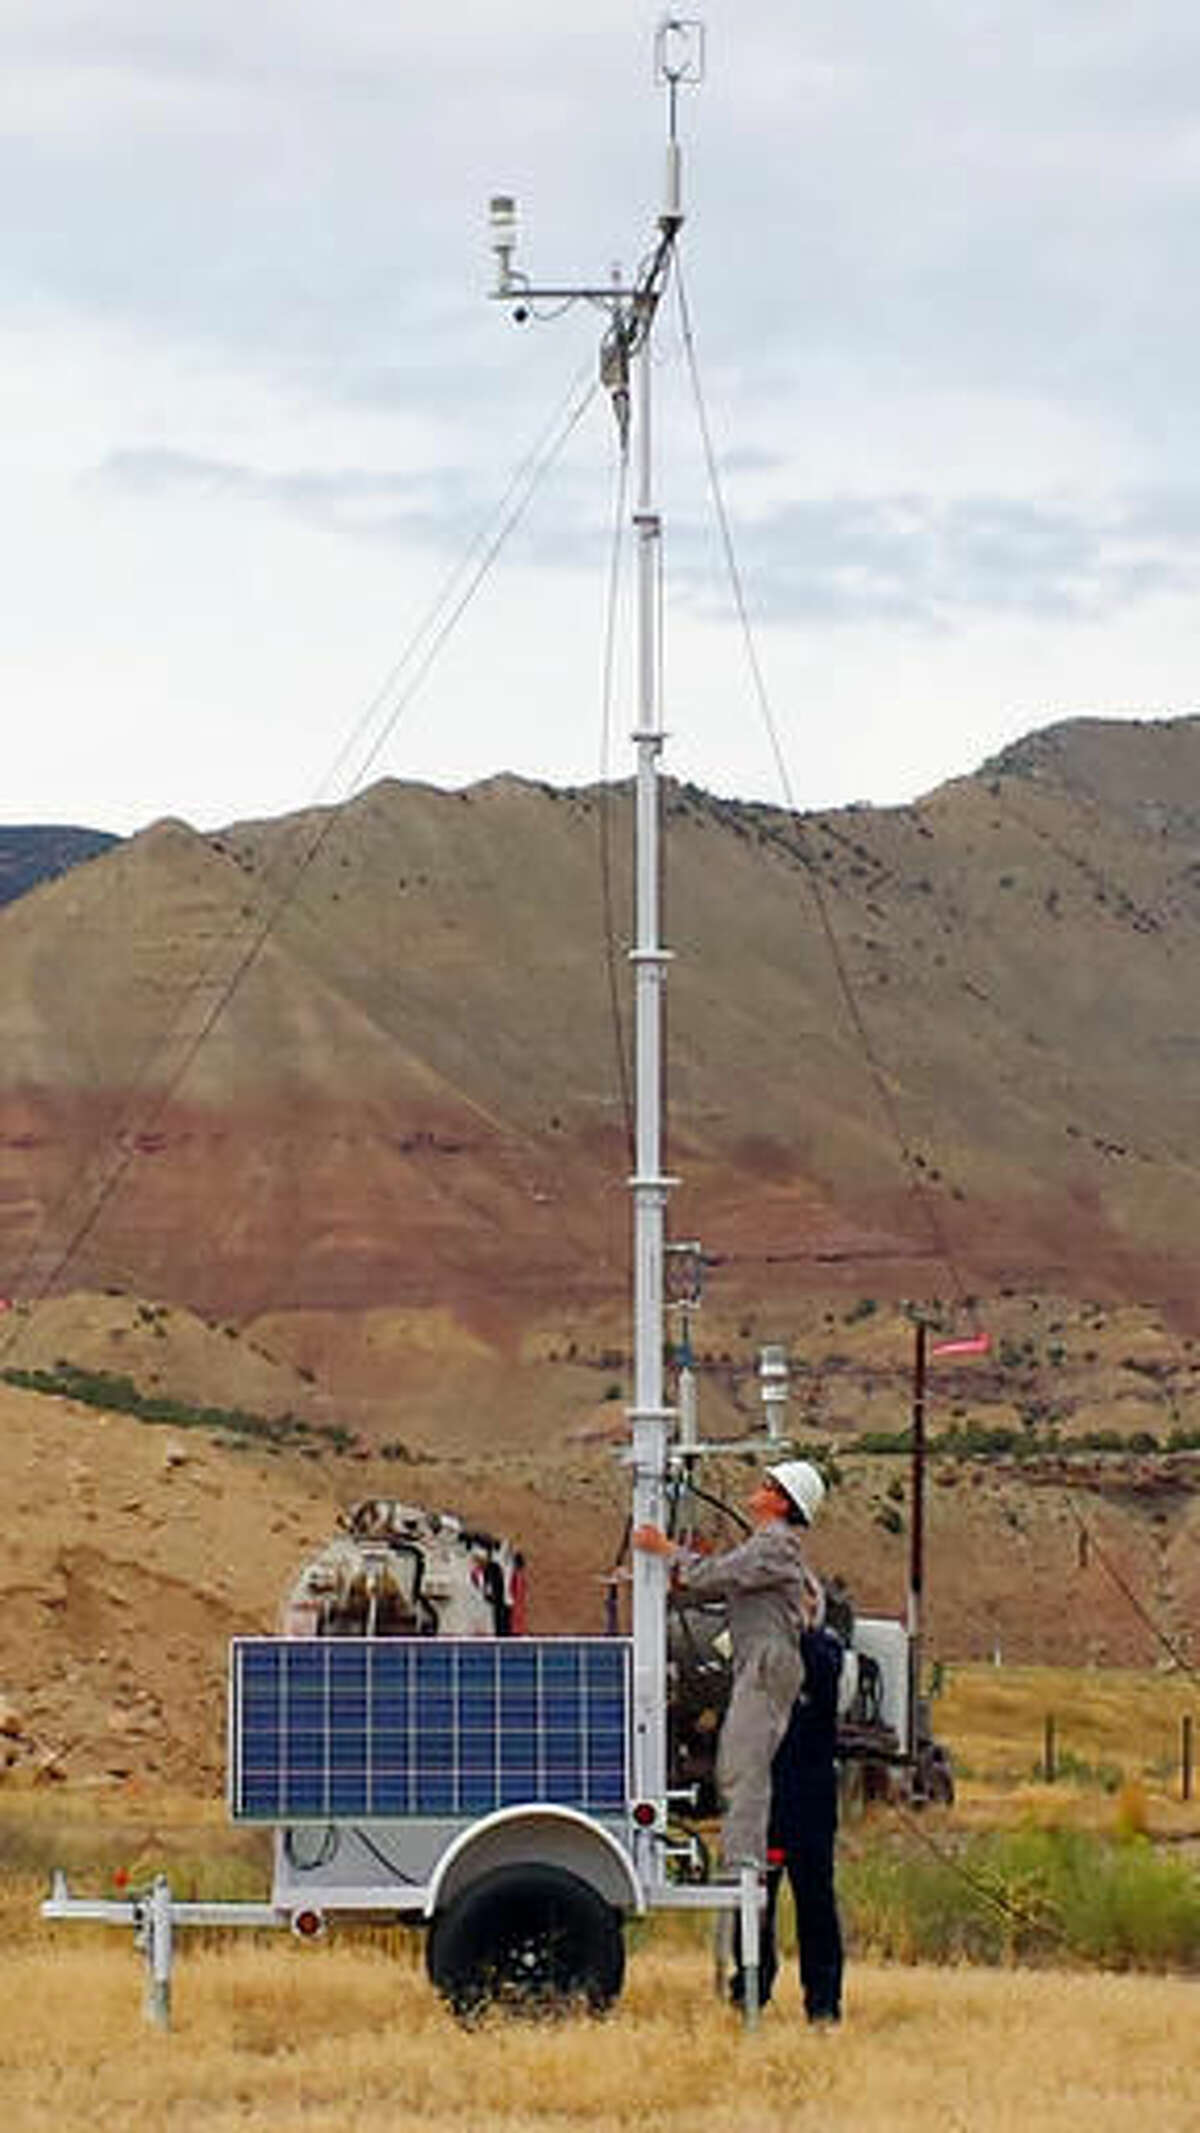 In this 2014 photo provided by Colorado State University, CSU research associate Kira Shonkwiler, front, and student Landan MacDonald, standing behind Shonkwiler, set up a weather station in Garfield County, Colo., as part of a study on air pollution from fracking wells. A study of air pollution from western Colorado fracking wells released Tuesday, June 14, 2016, found the highest rate of emissions came just after fracking was completed. (Arsineh Hecobian/Colorado State University via AP)